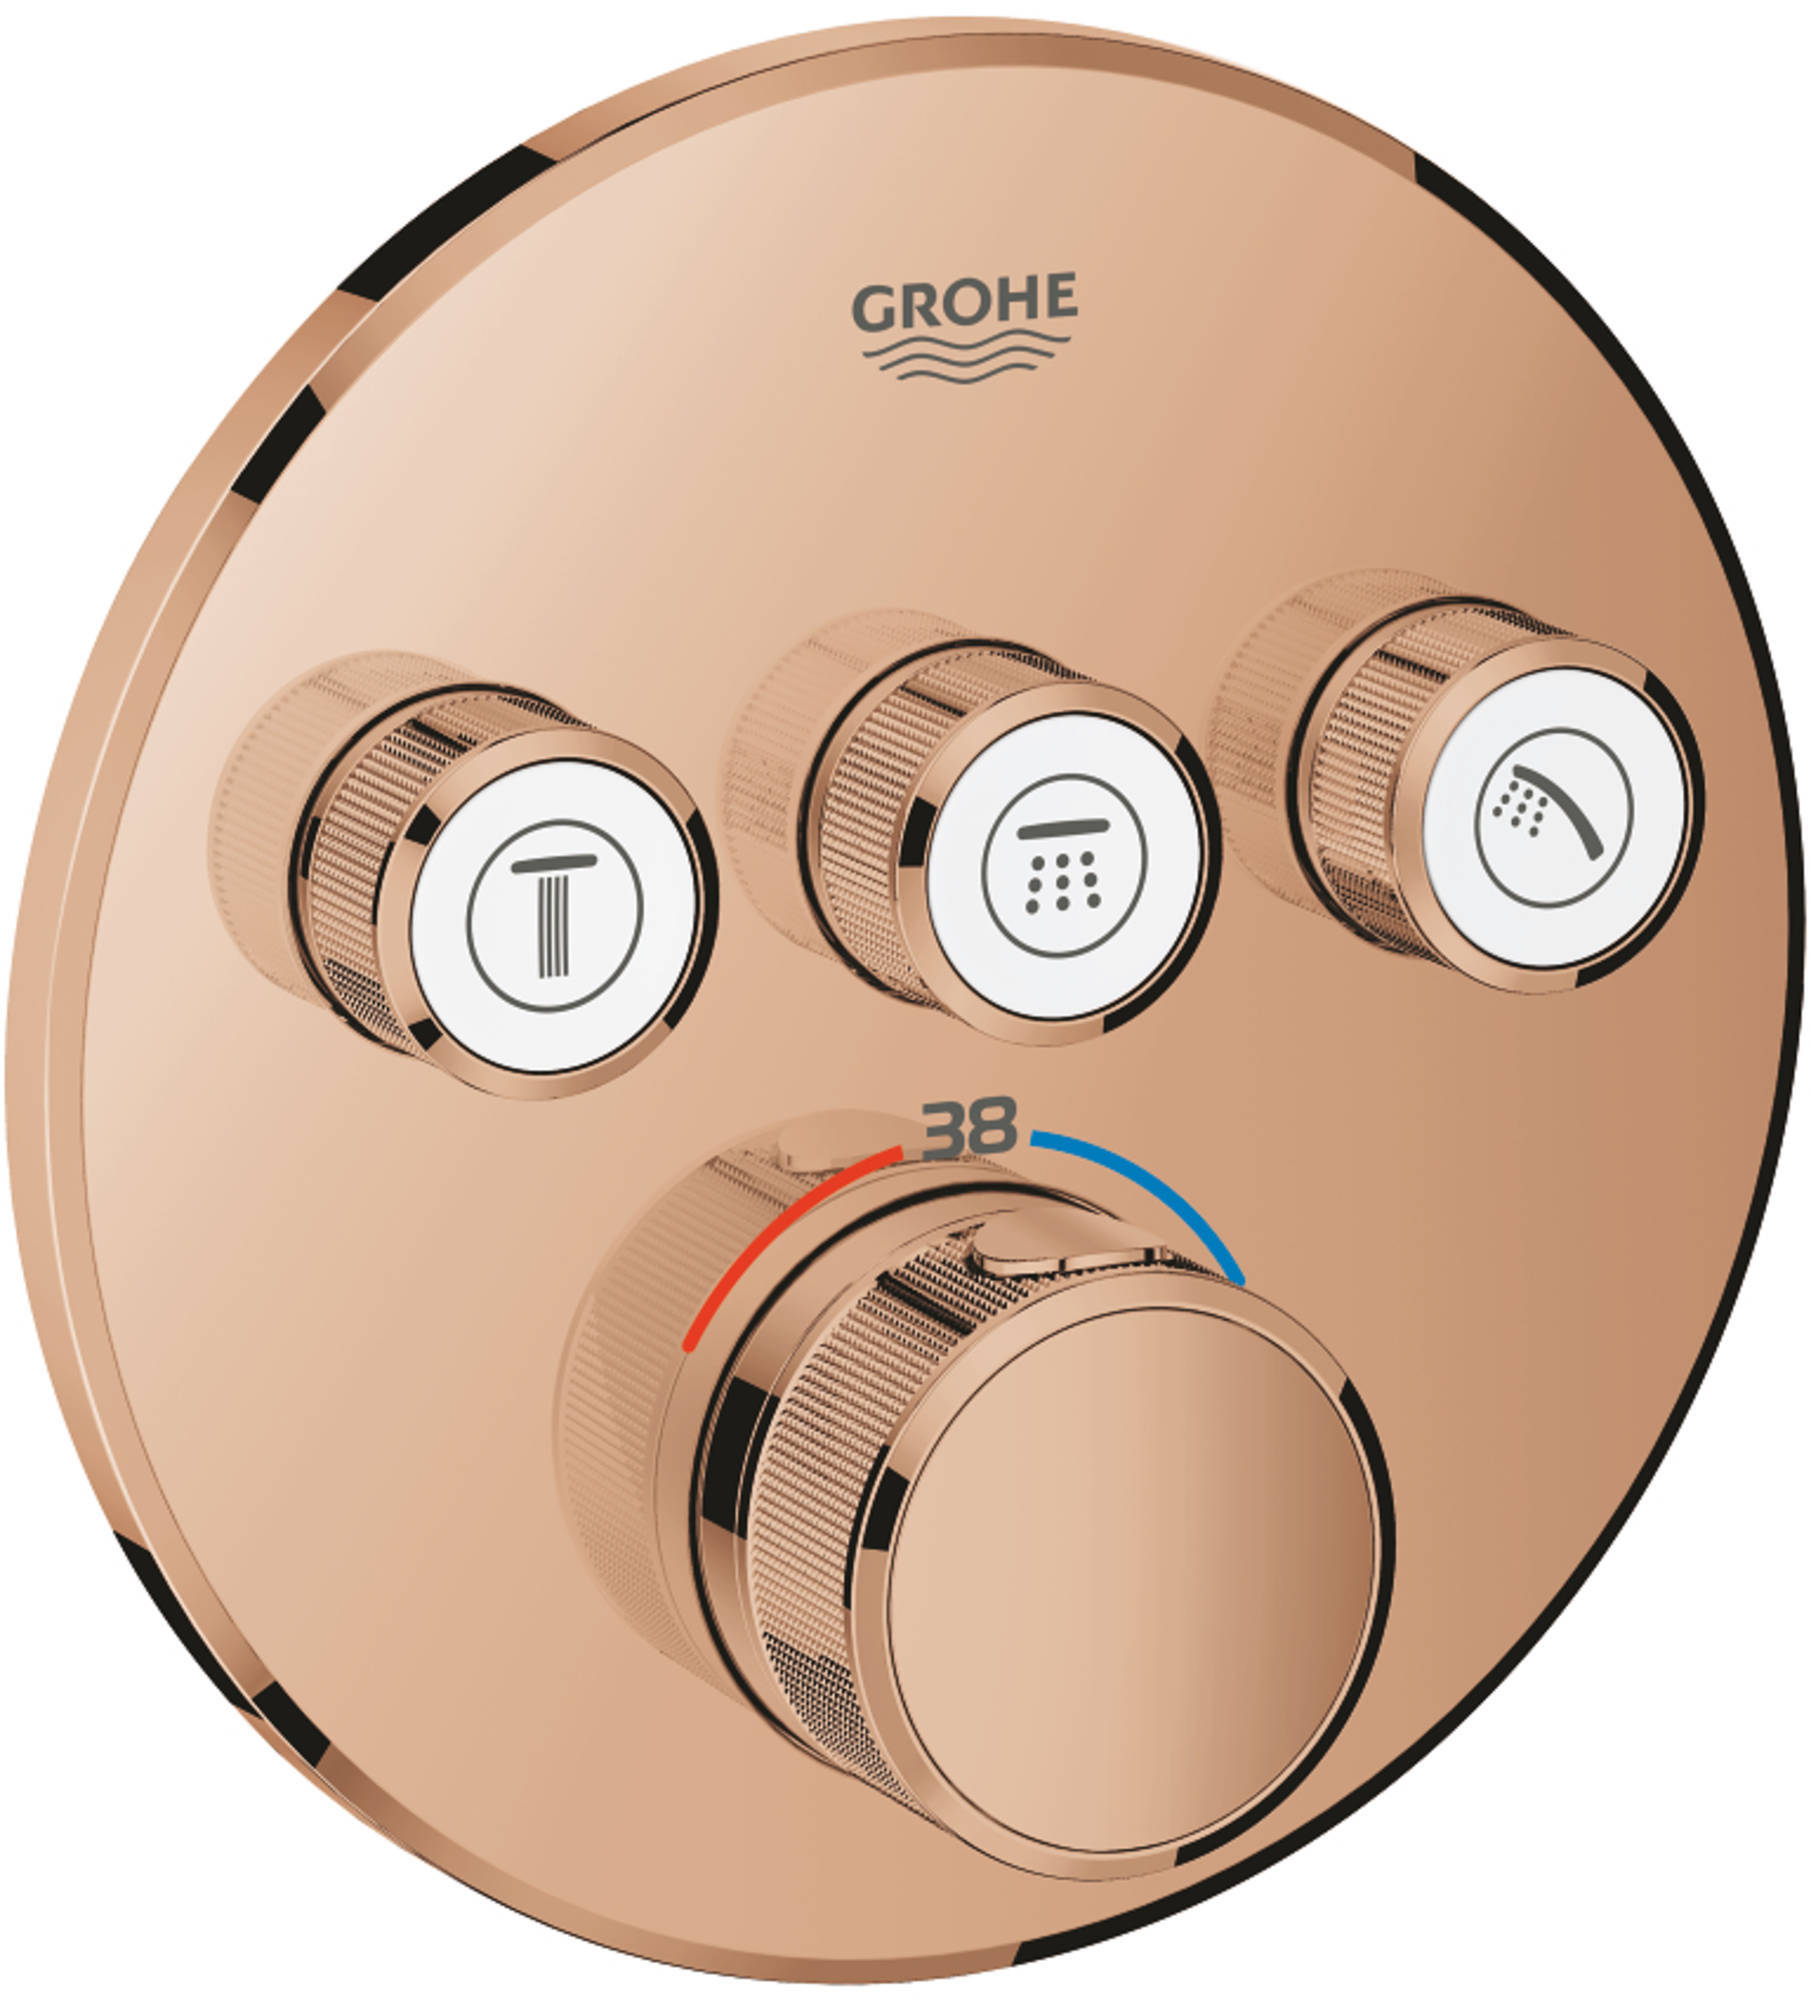 GROHE Grohtherm Smartcontrol Douche Opbouwdeel Rond 15,8x4,3 cm Warm Sunset